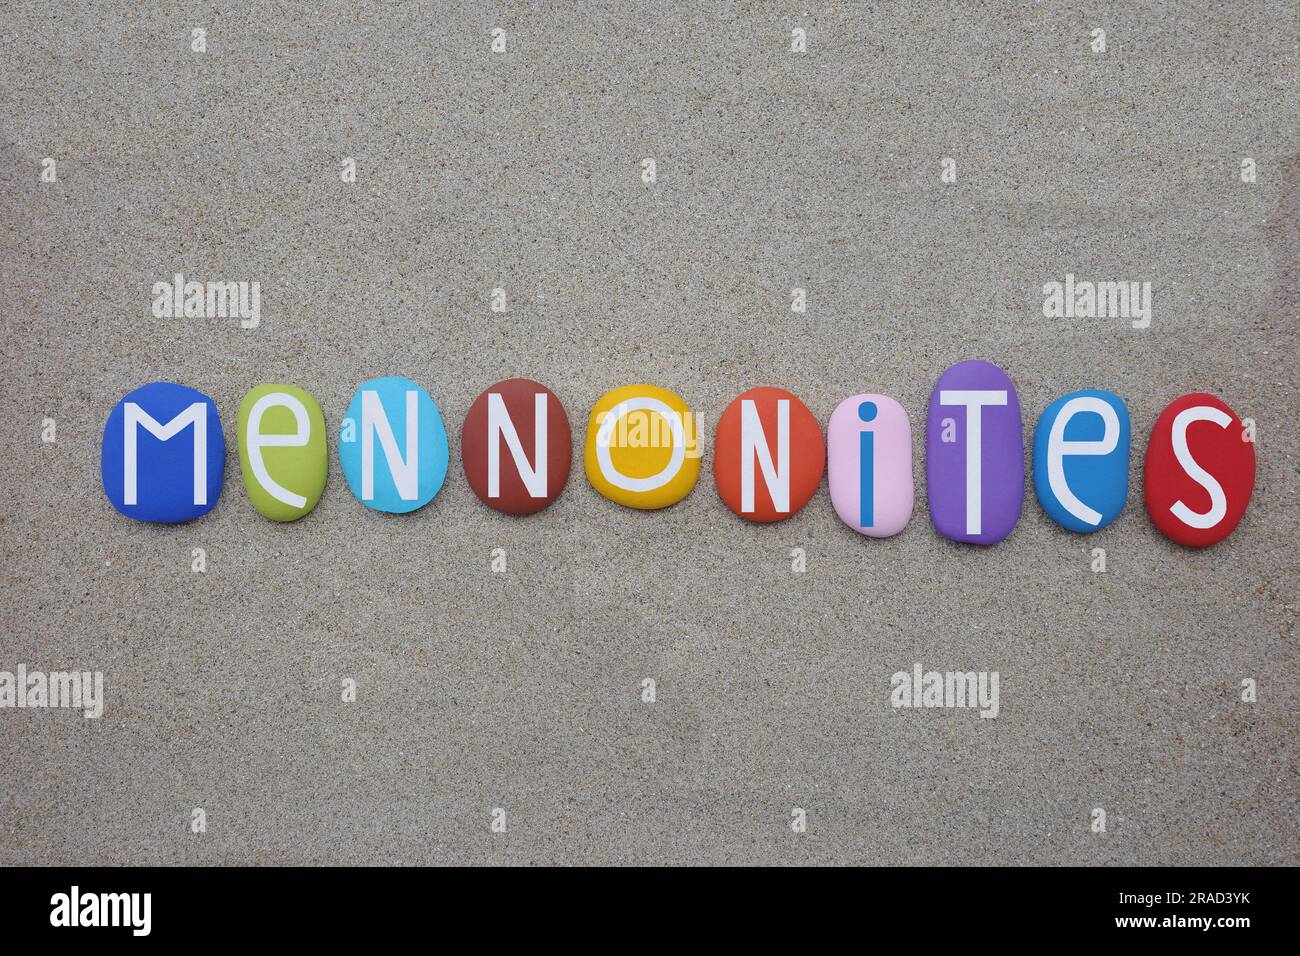 Mennonites, groups of Anabaptist Christian church communities of denominations, creative text composed with multi colored stone letters on the sand Stock Photo